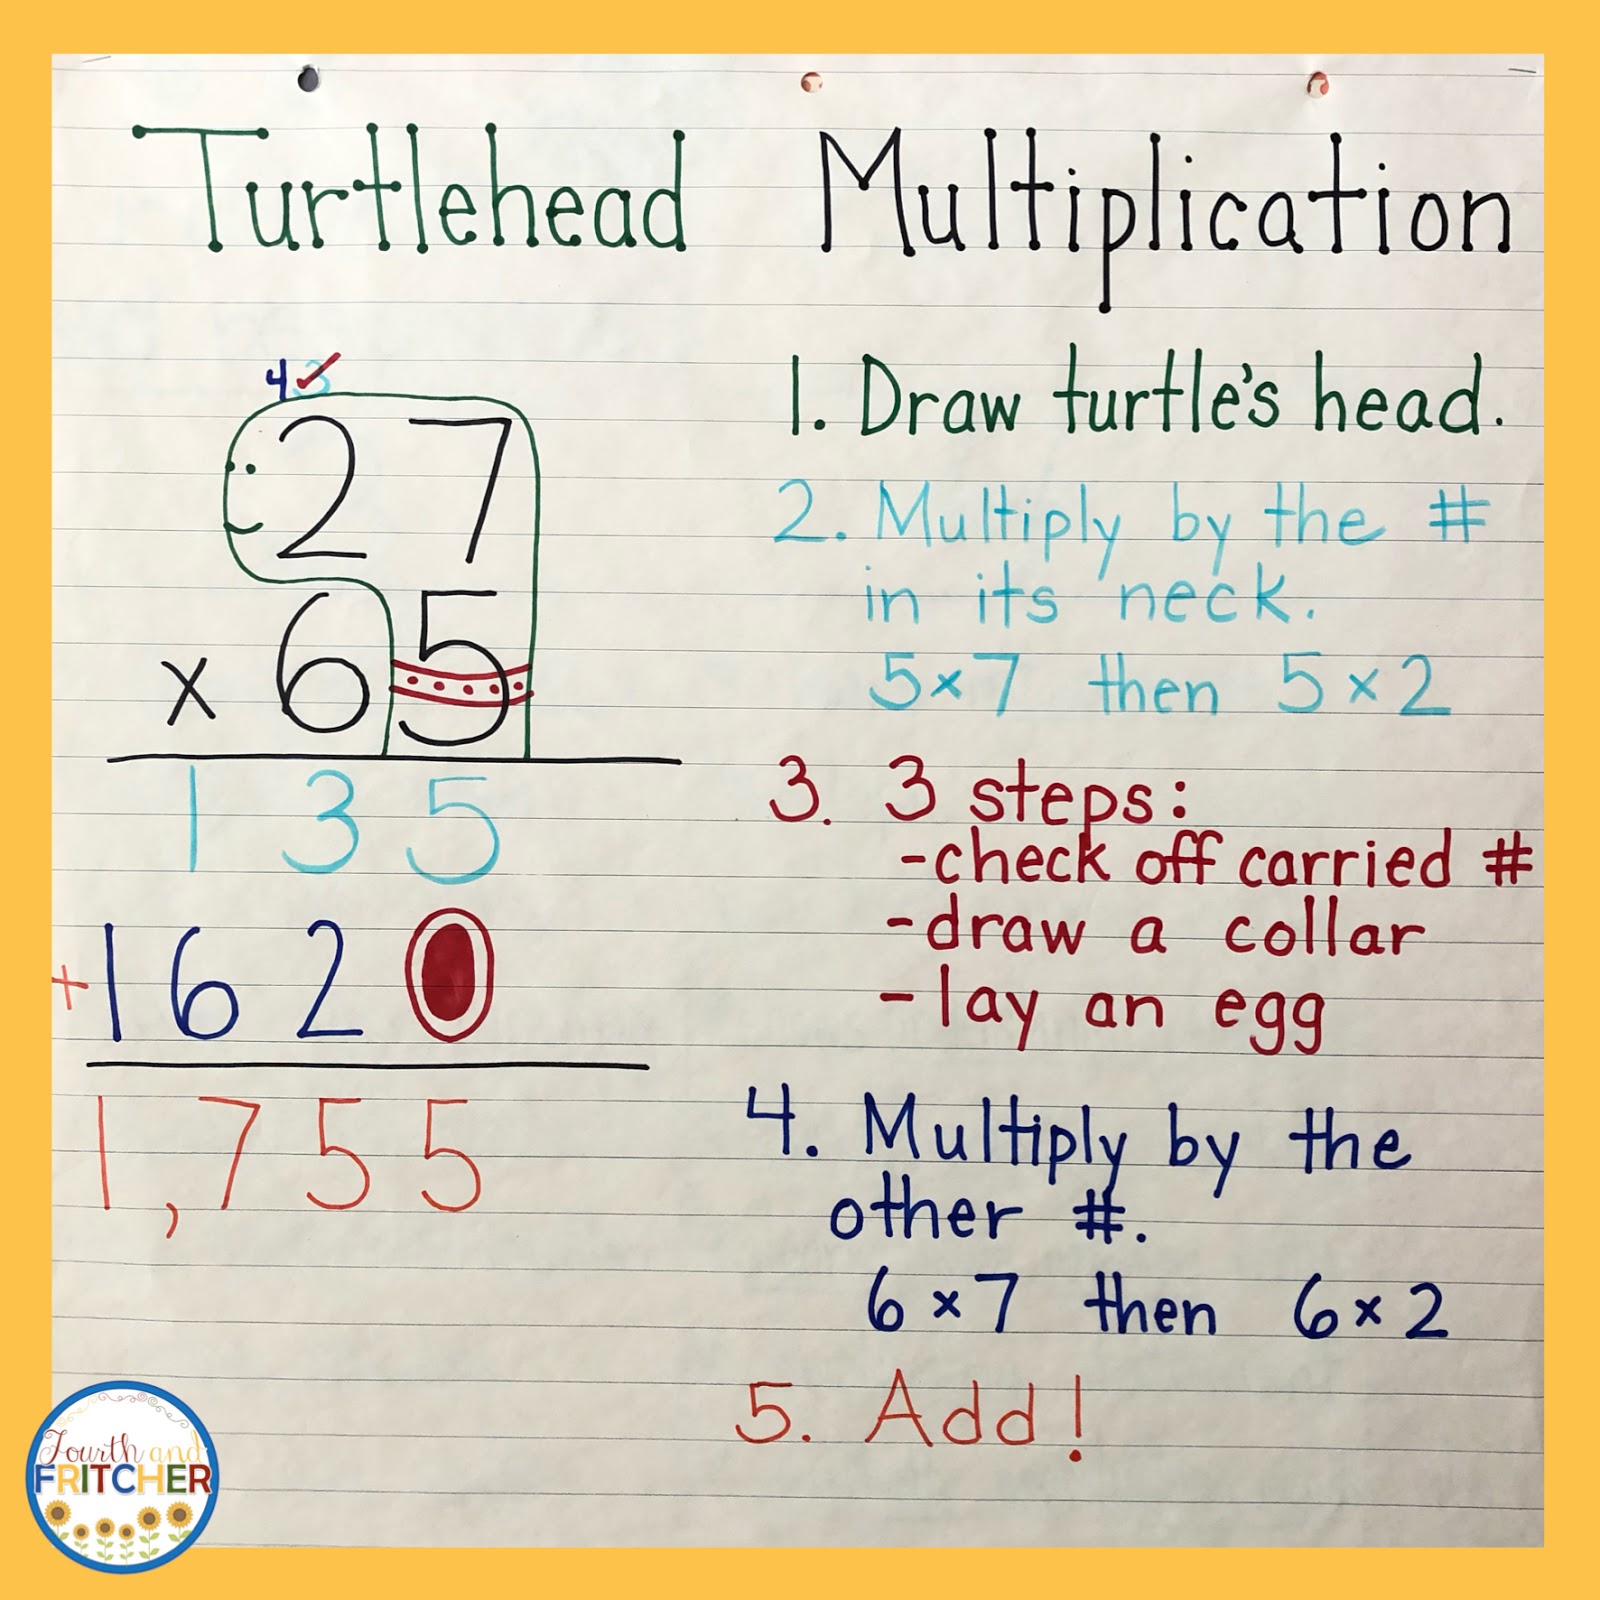 fourth-and-fritcher-double-digit-multiplication-strategies